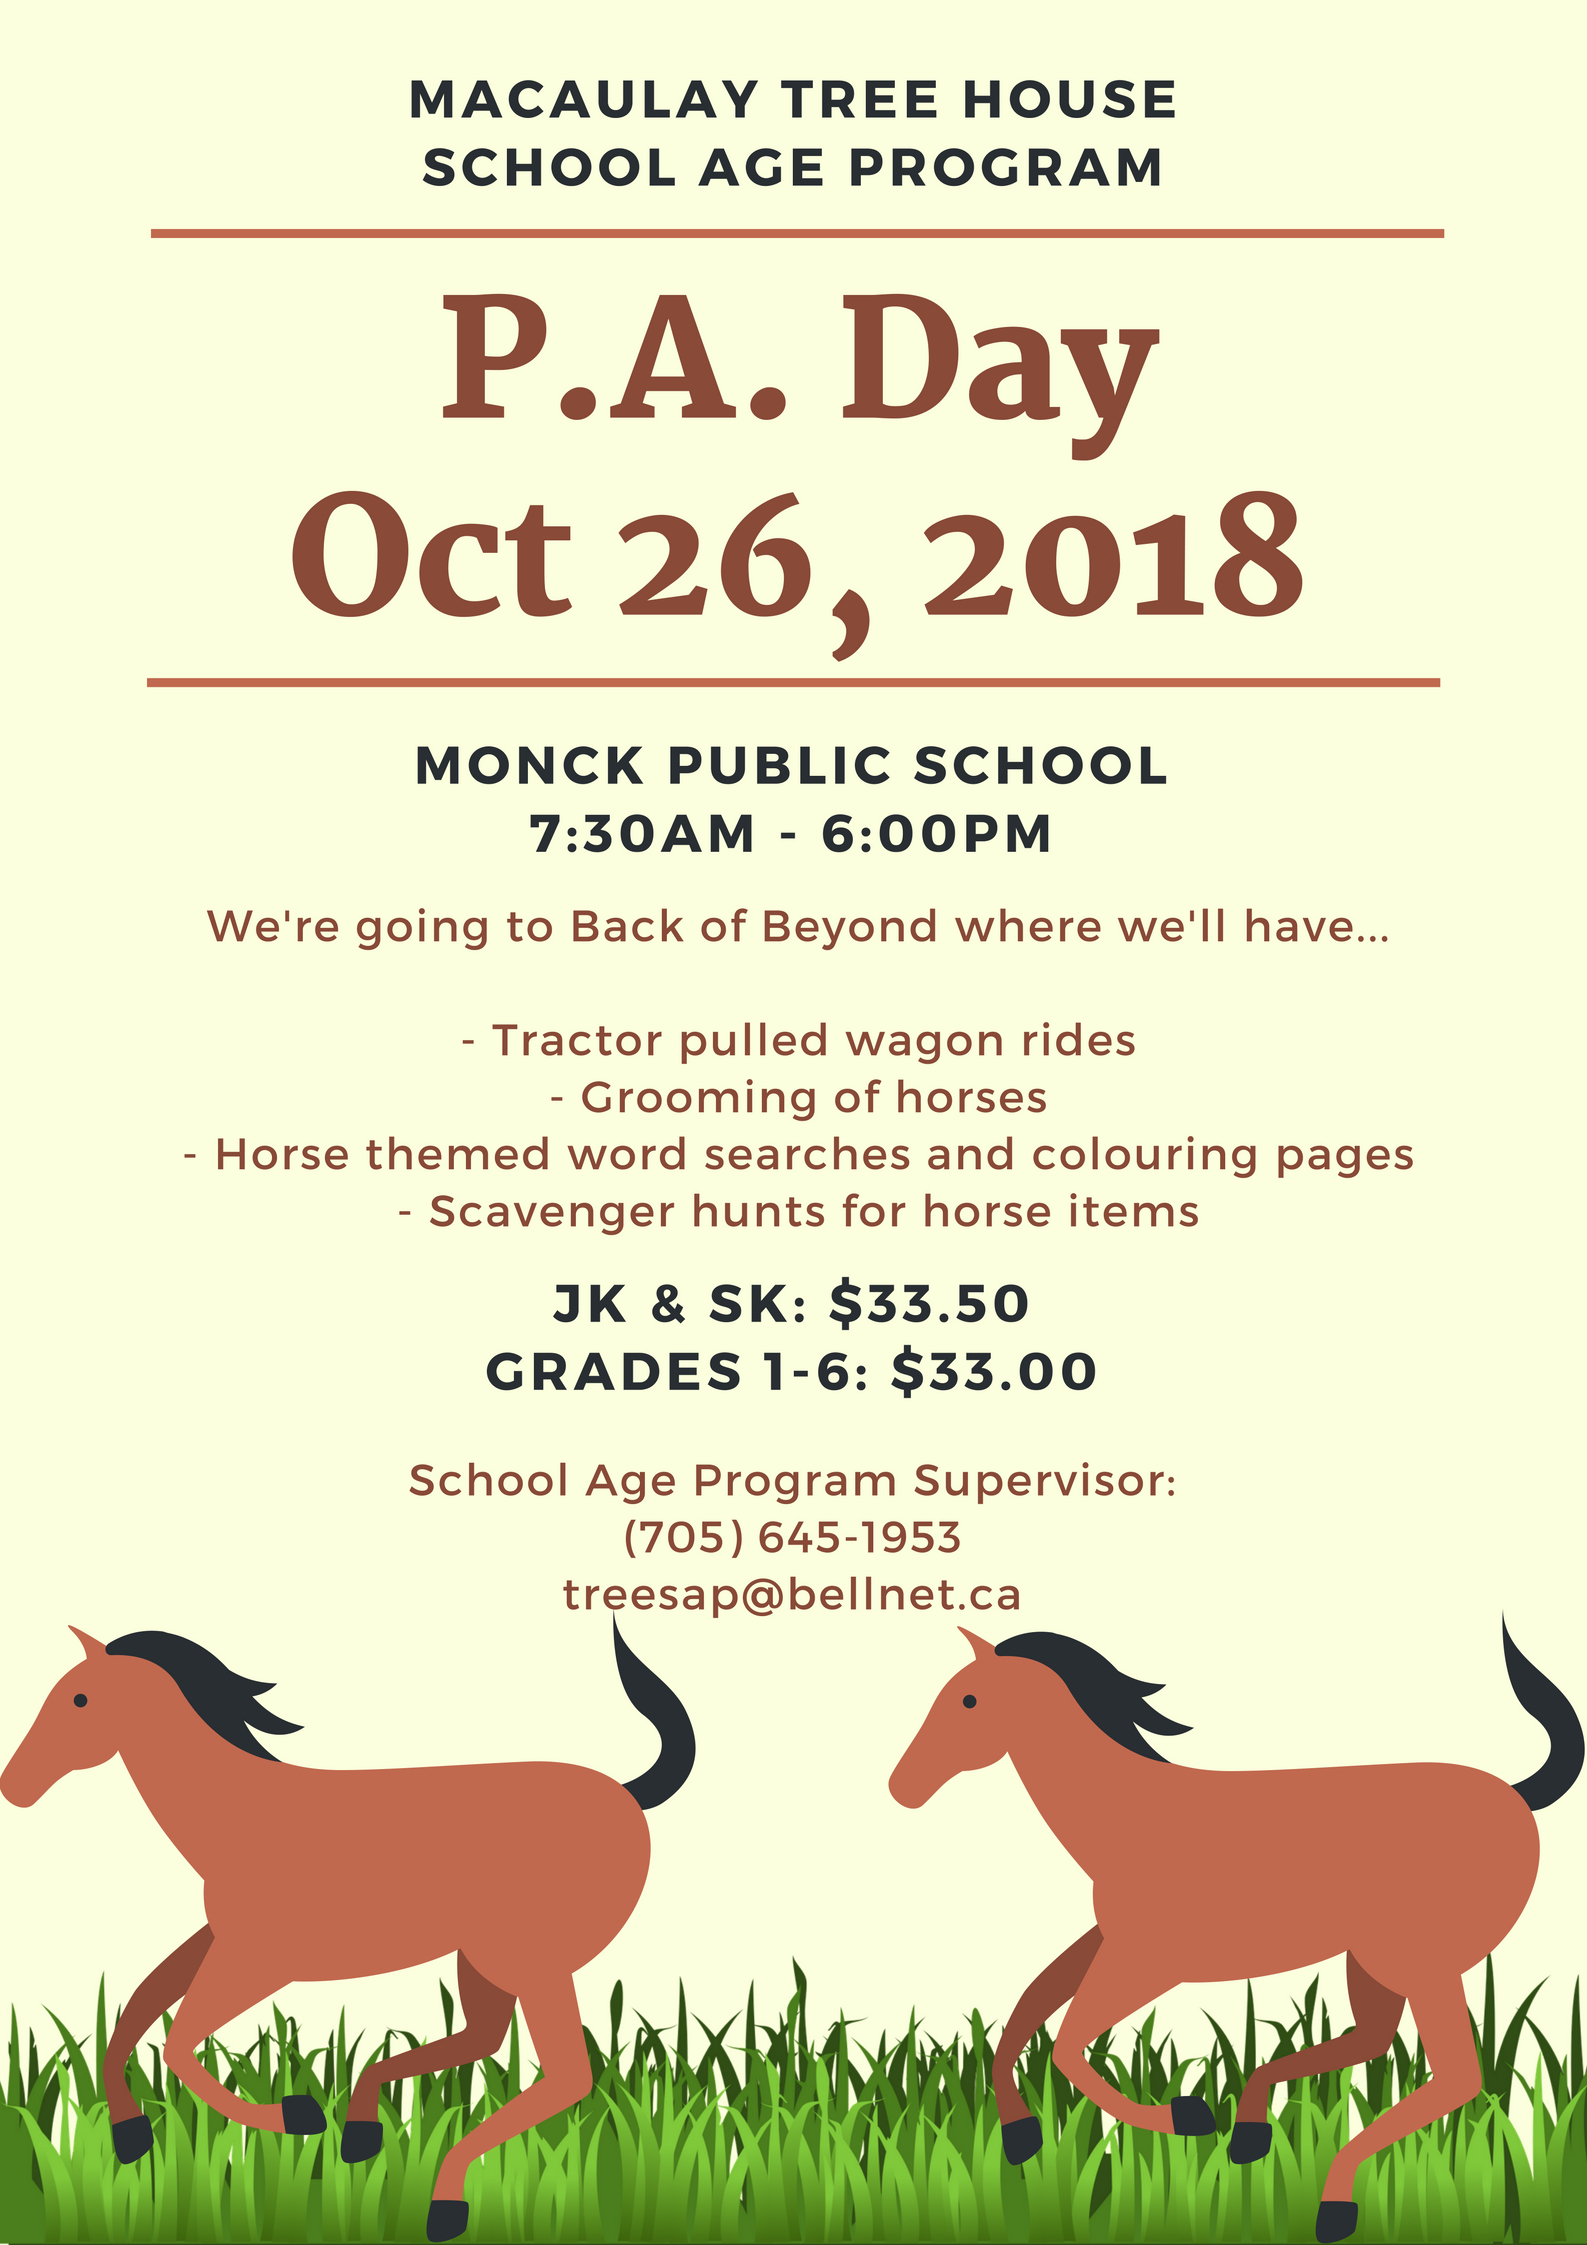 P.A. Day: October 26, 2018